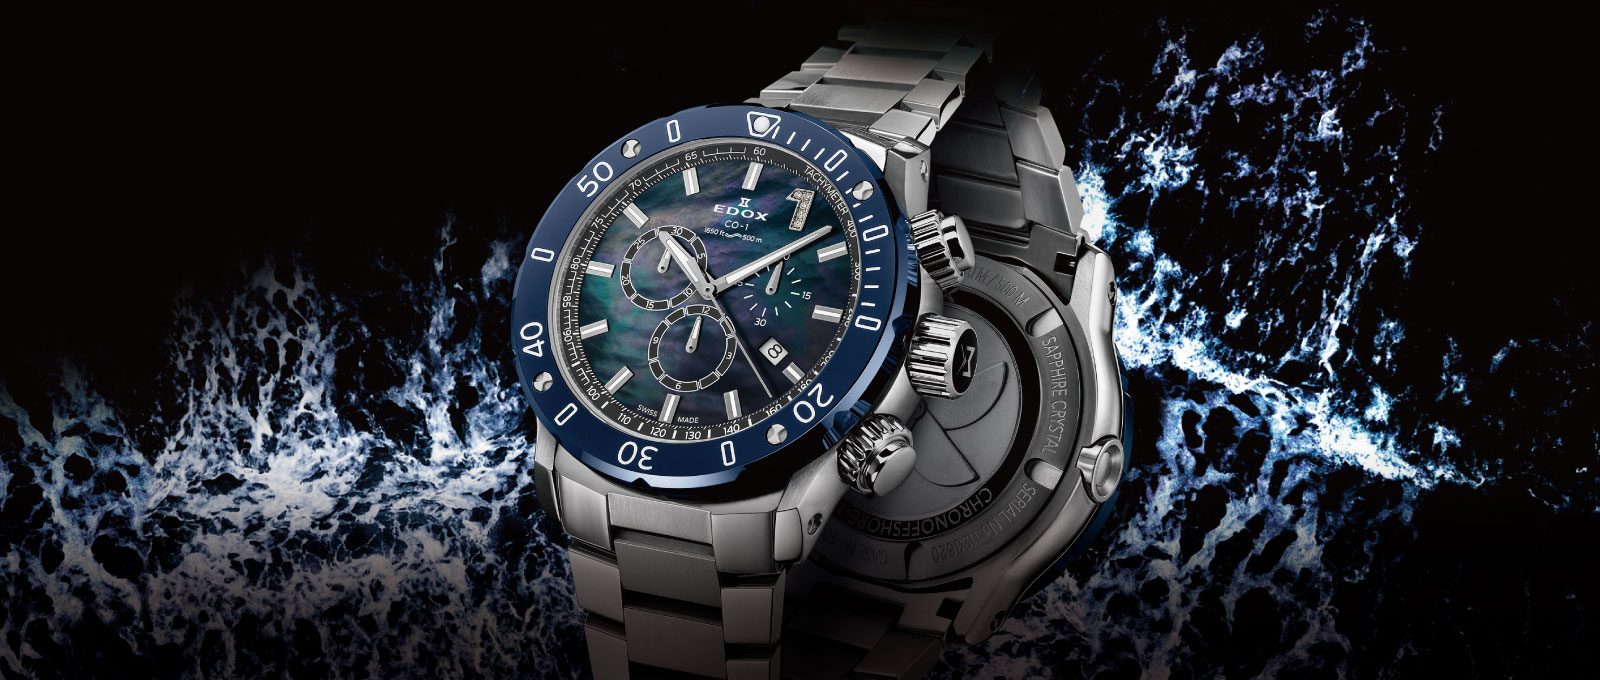 EDOX / エドックス – TIME BOX official site